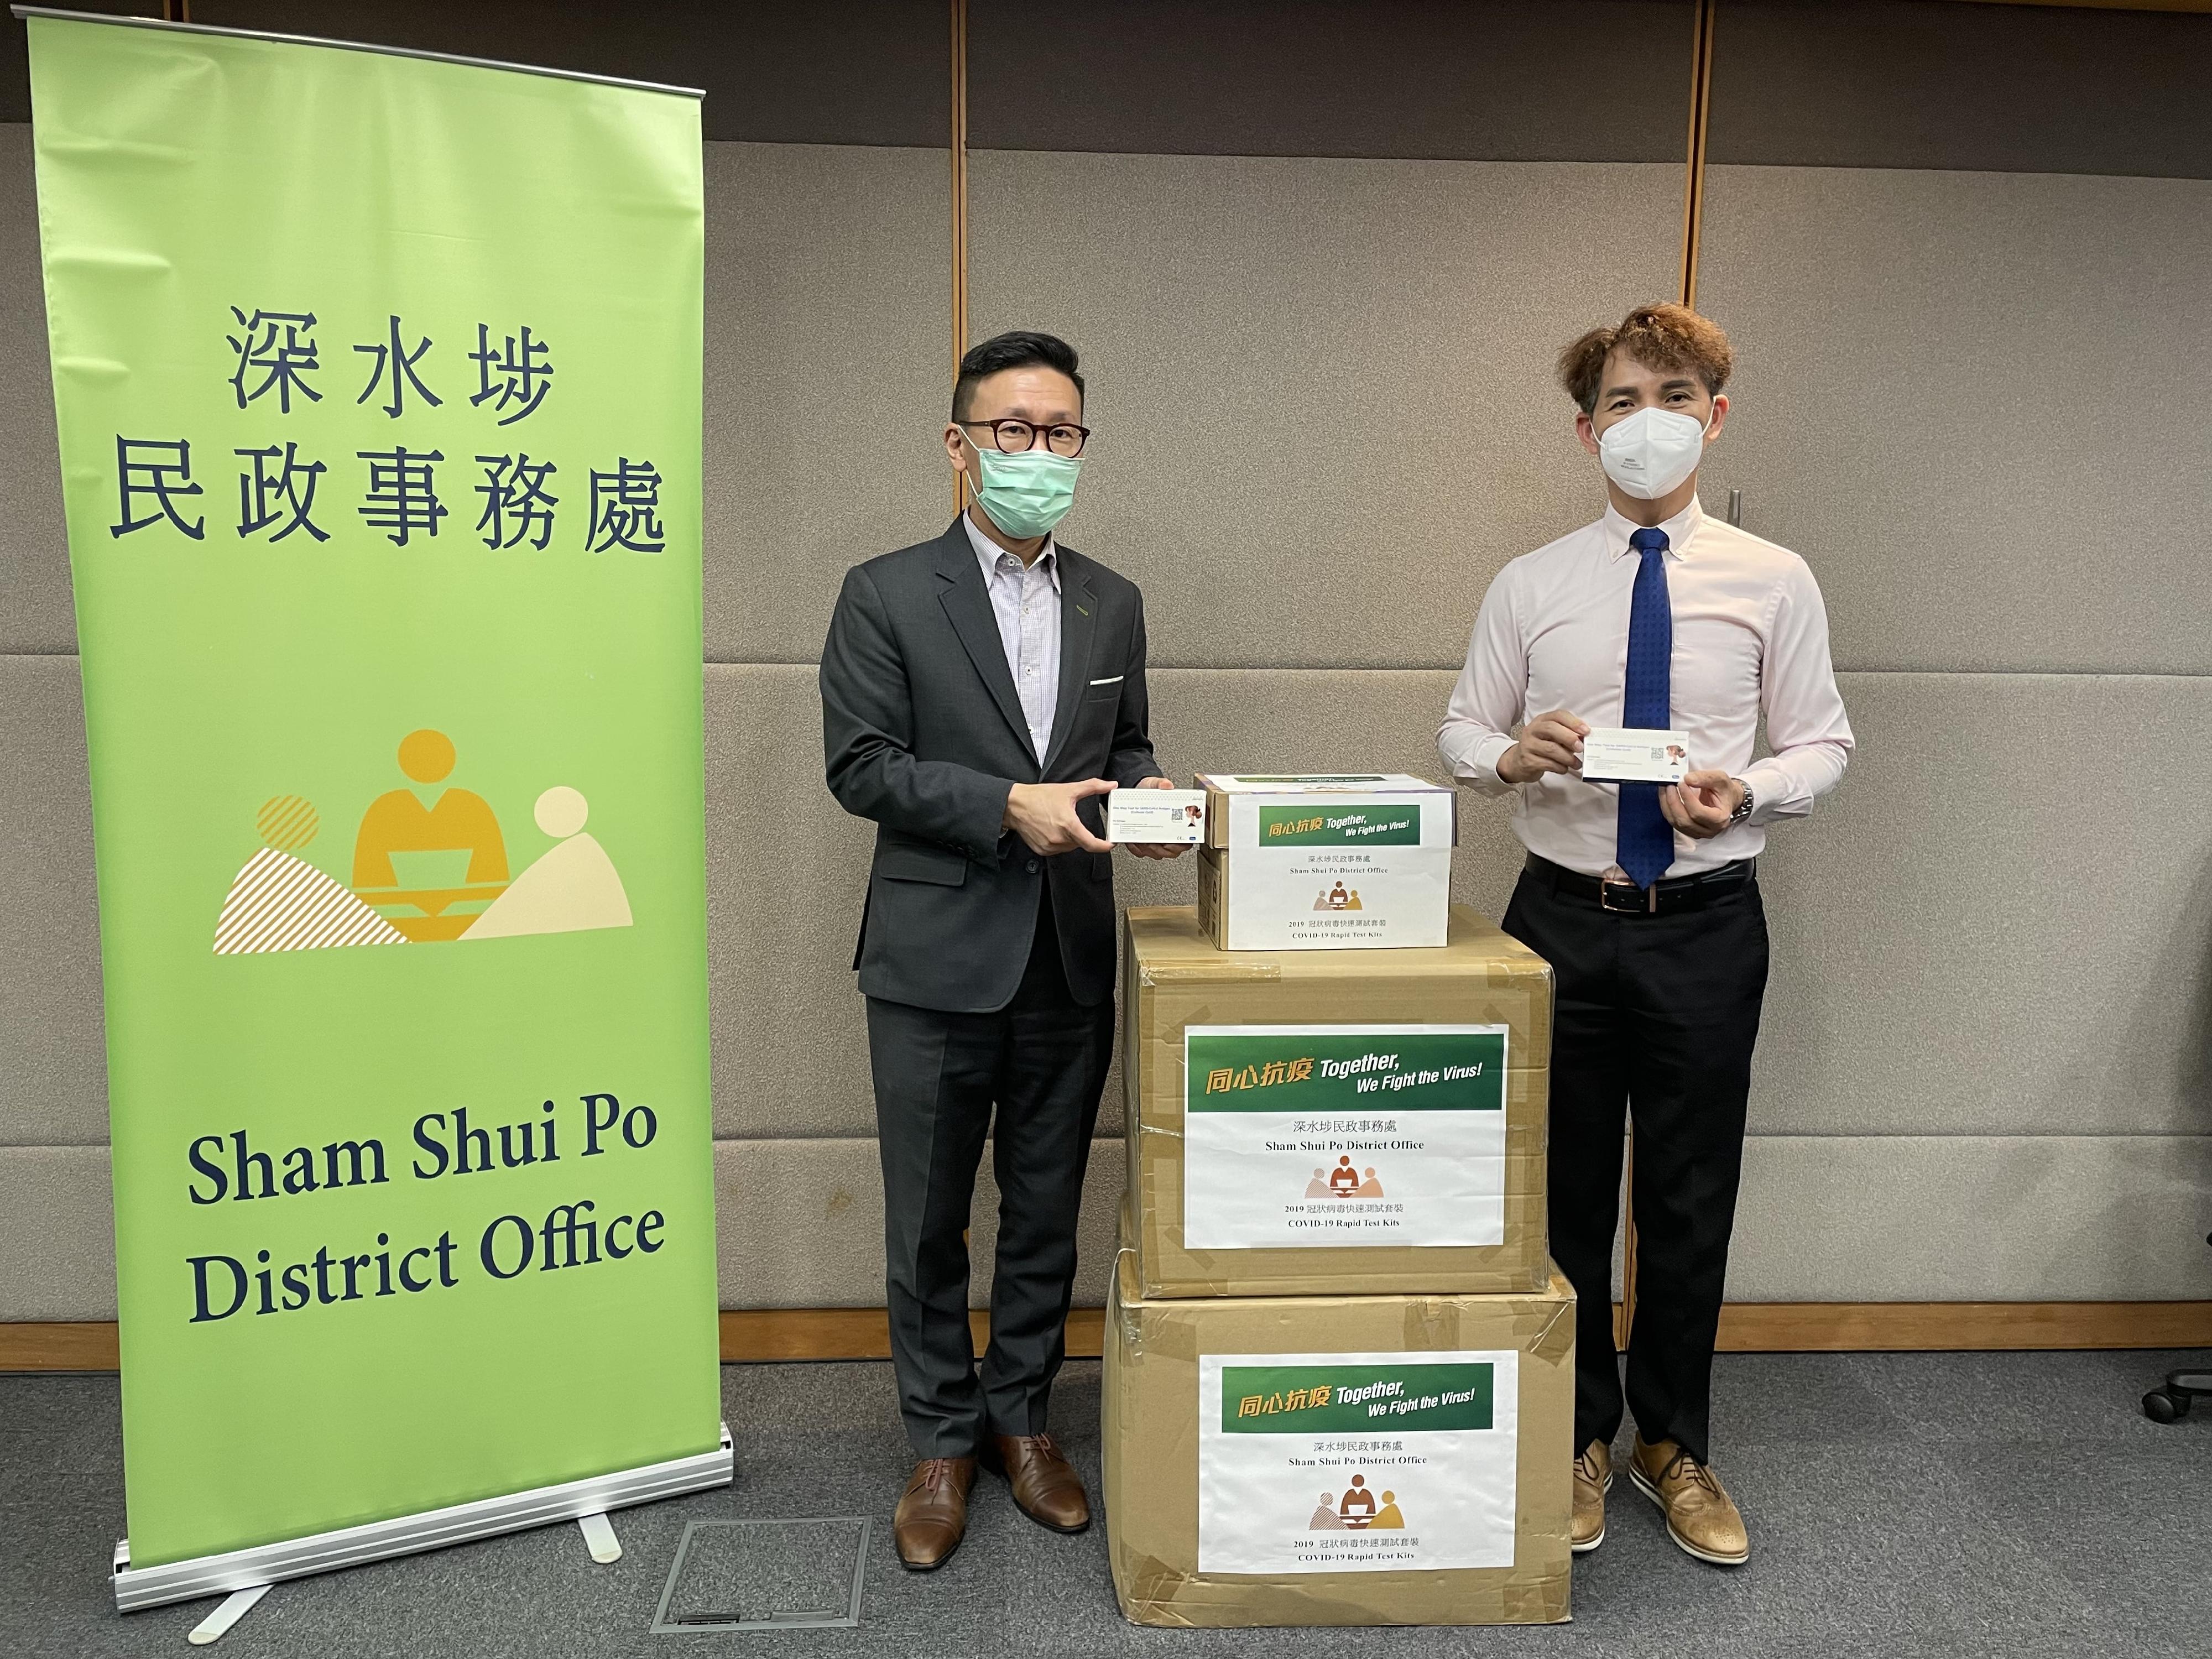 The Sham Shui Po District Office today (July 22) distributed COVID-19 rapid test kits to households, cleansing workers and property management staff living and working in Liberte for voluntary testing through the property management company.

